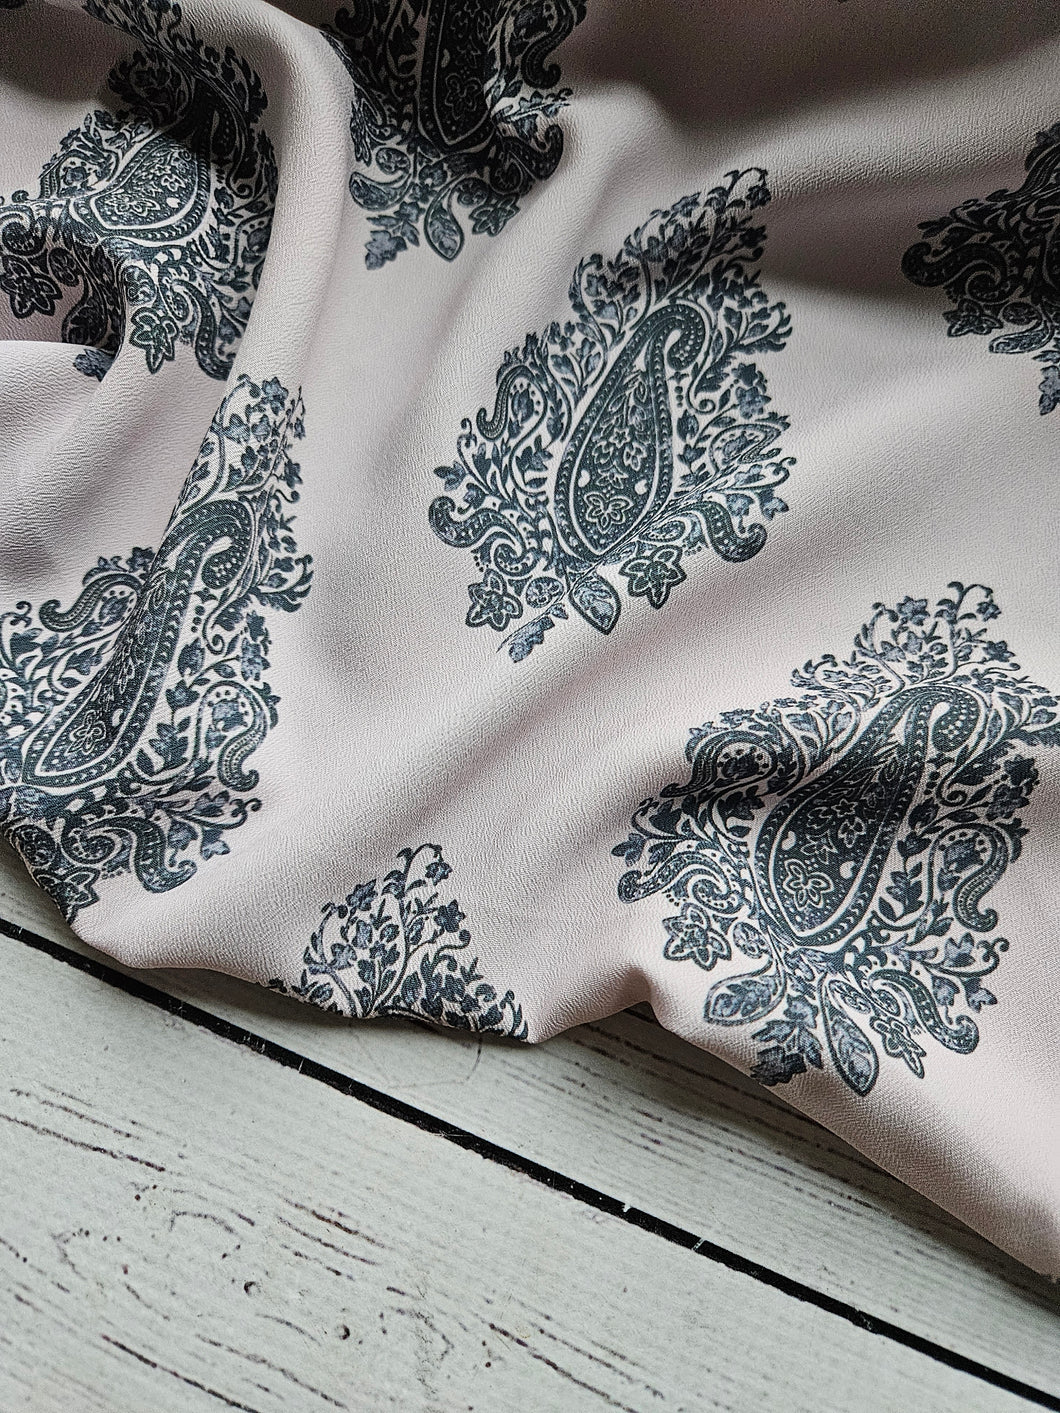 Exclusive Design- Barely Blush & Charcoal Symmetrical Paisley Print {by the half yard}